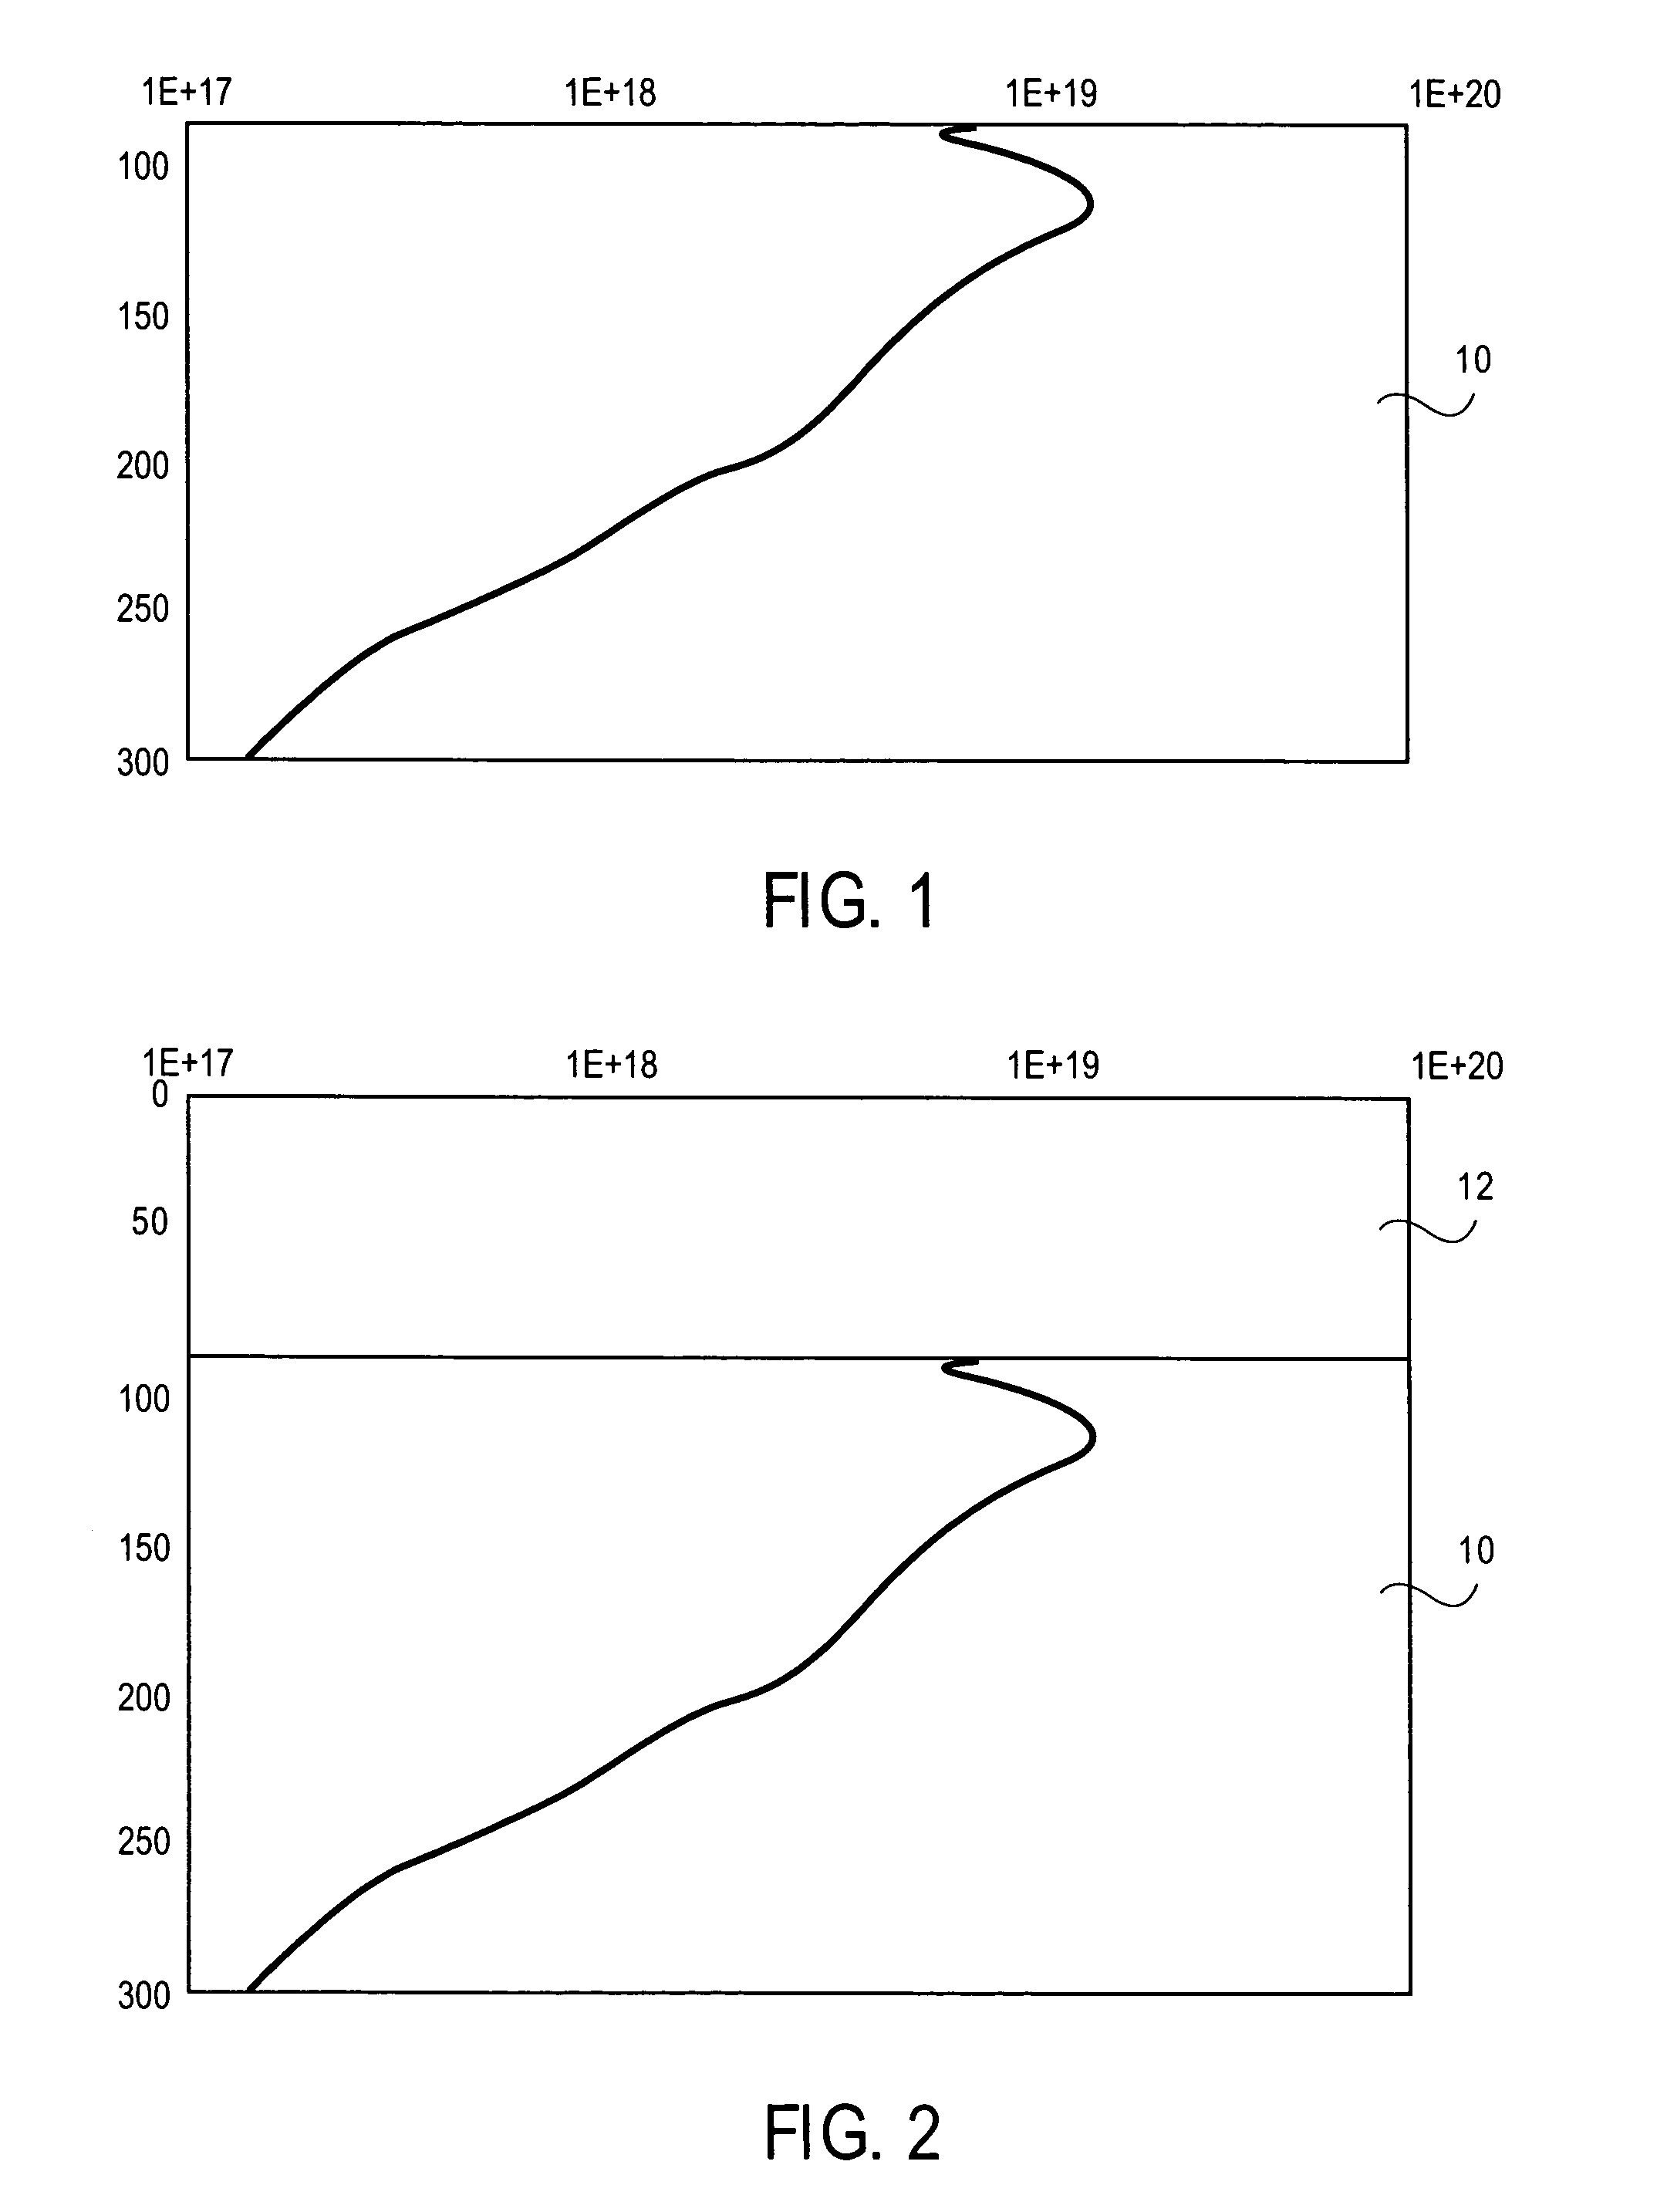 Metal gate transistors with epitaxial source and drain regions